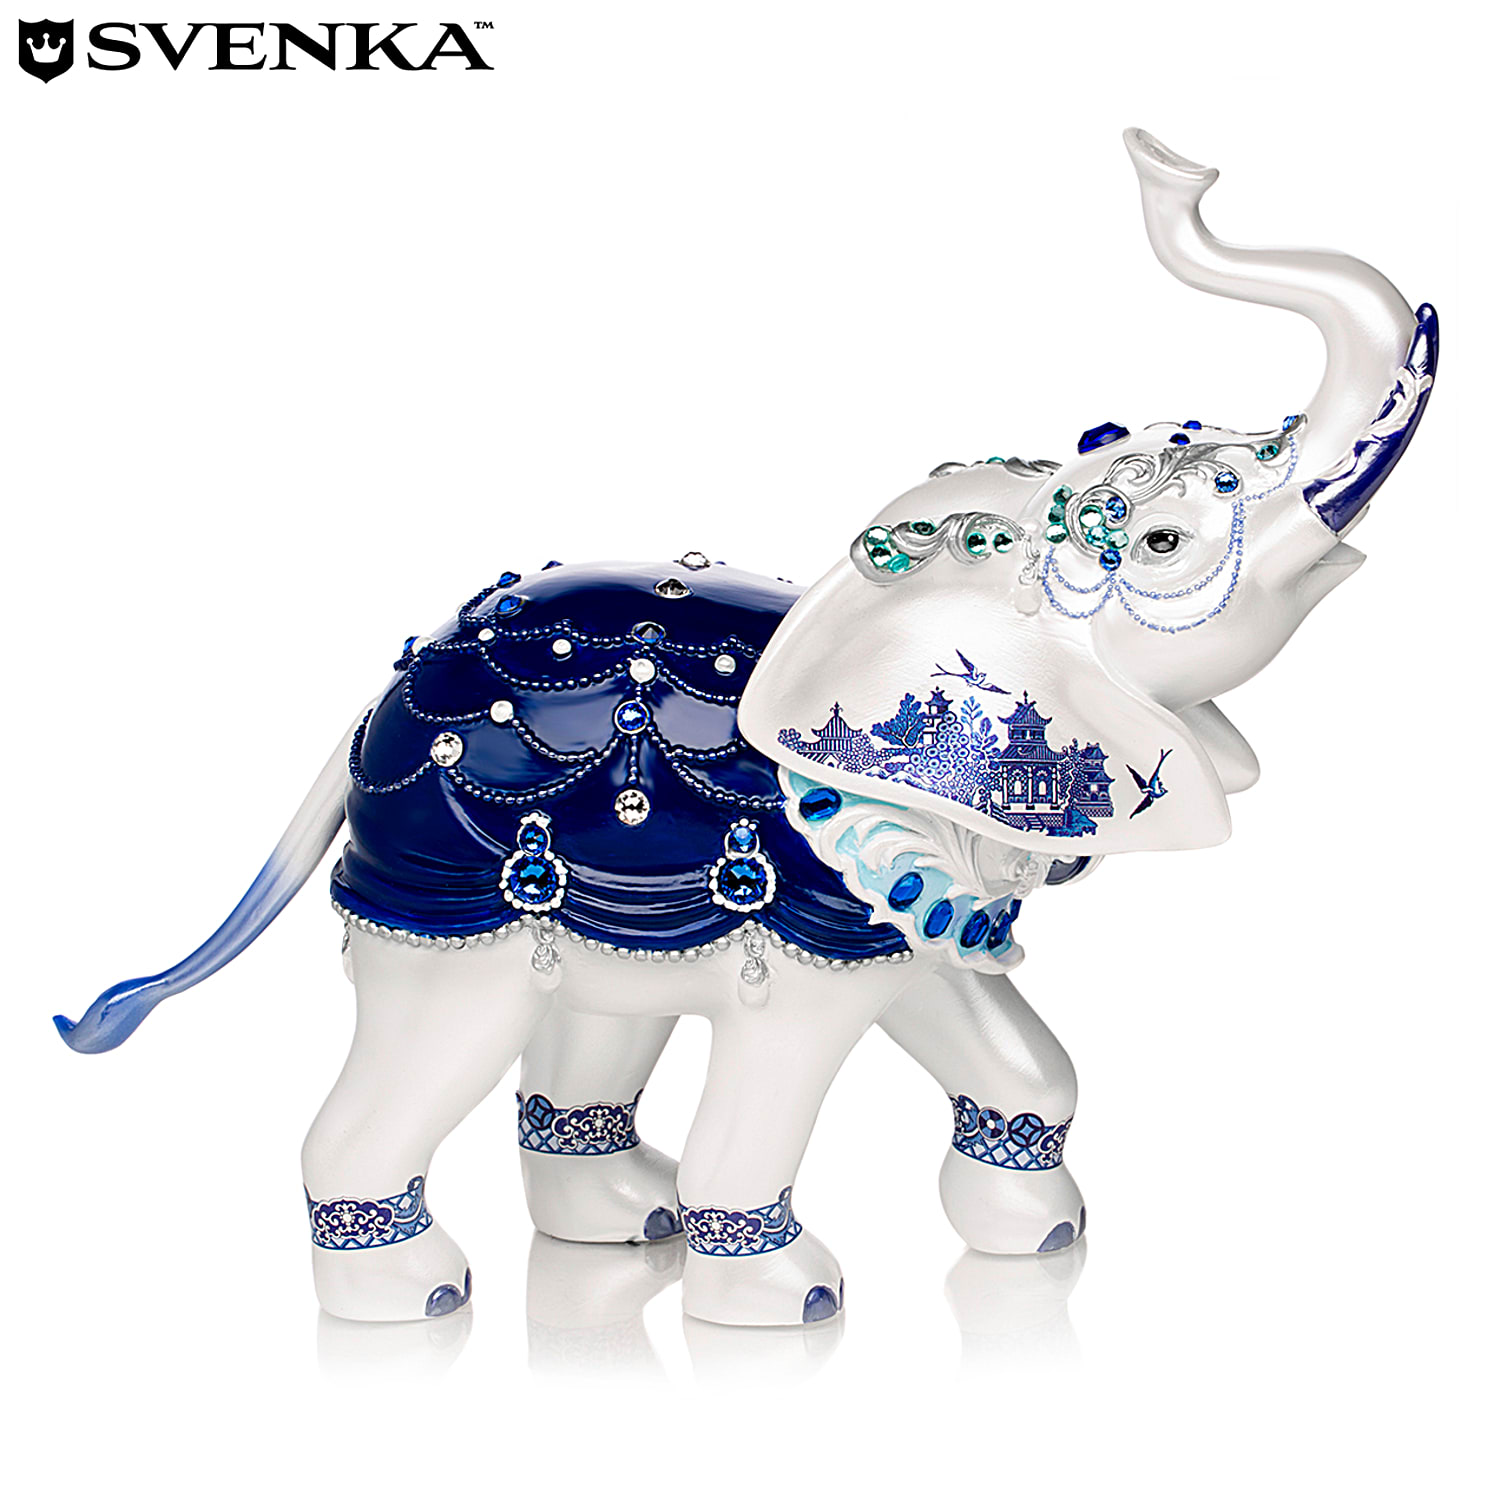 Sparkling Blue Willow Hand-Painted Porcelain Cat Figurine With A Blue  Willow China Pattern & Adorned With Svenka Crystals